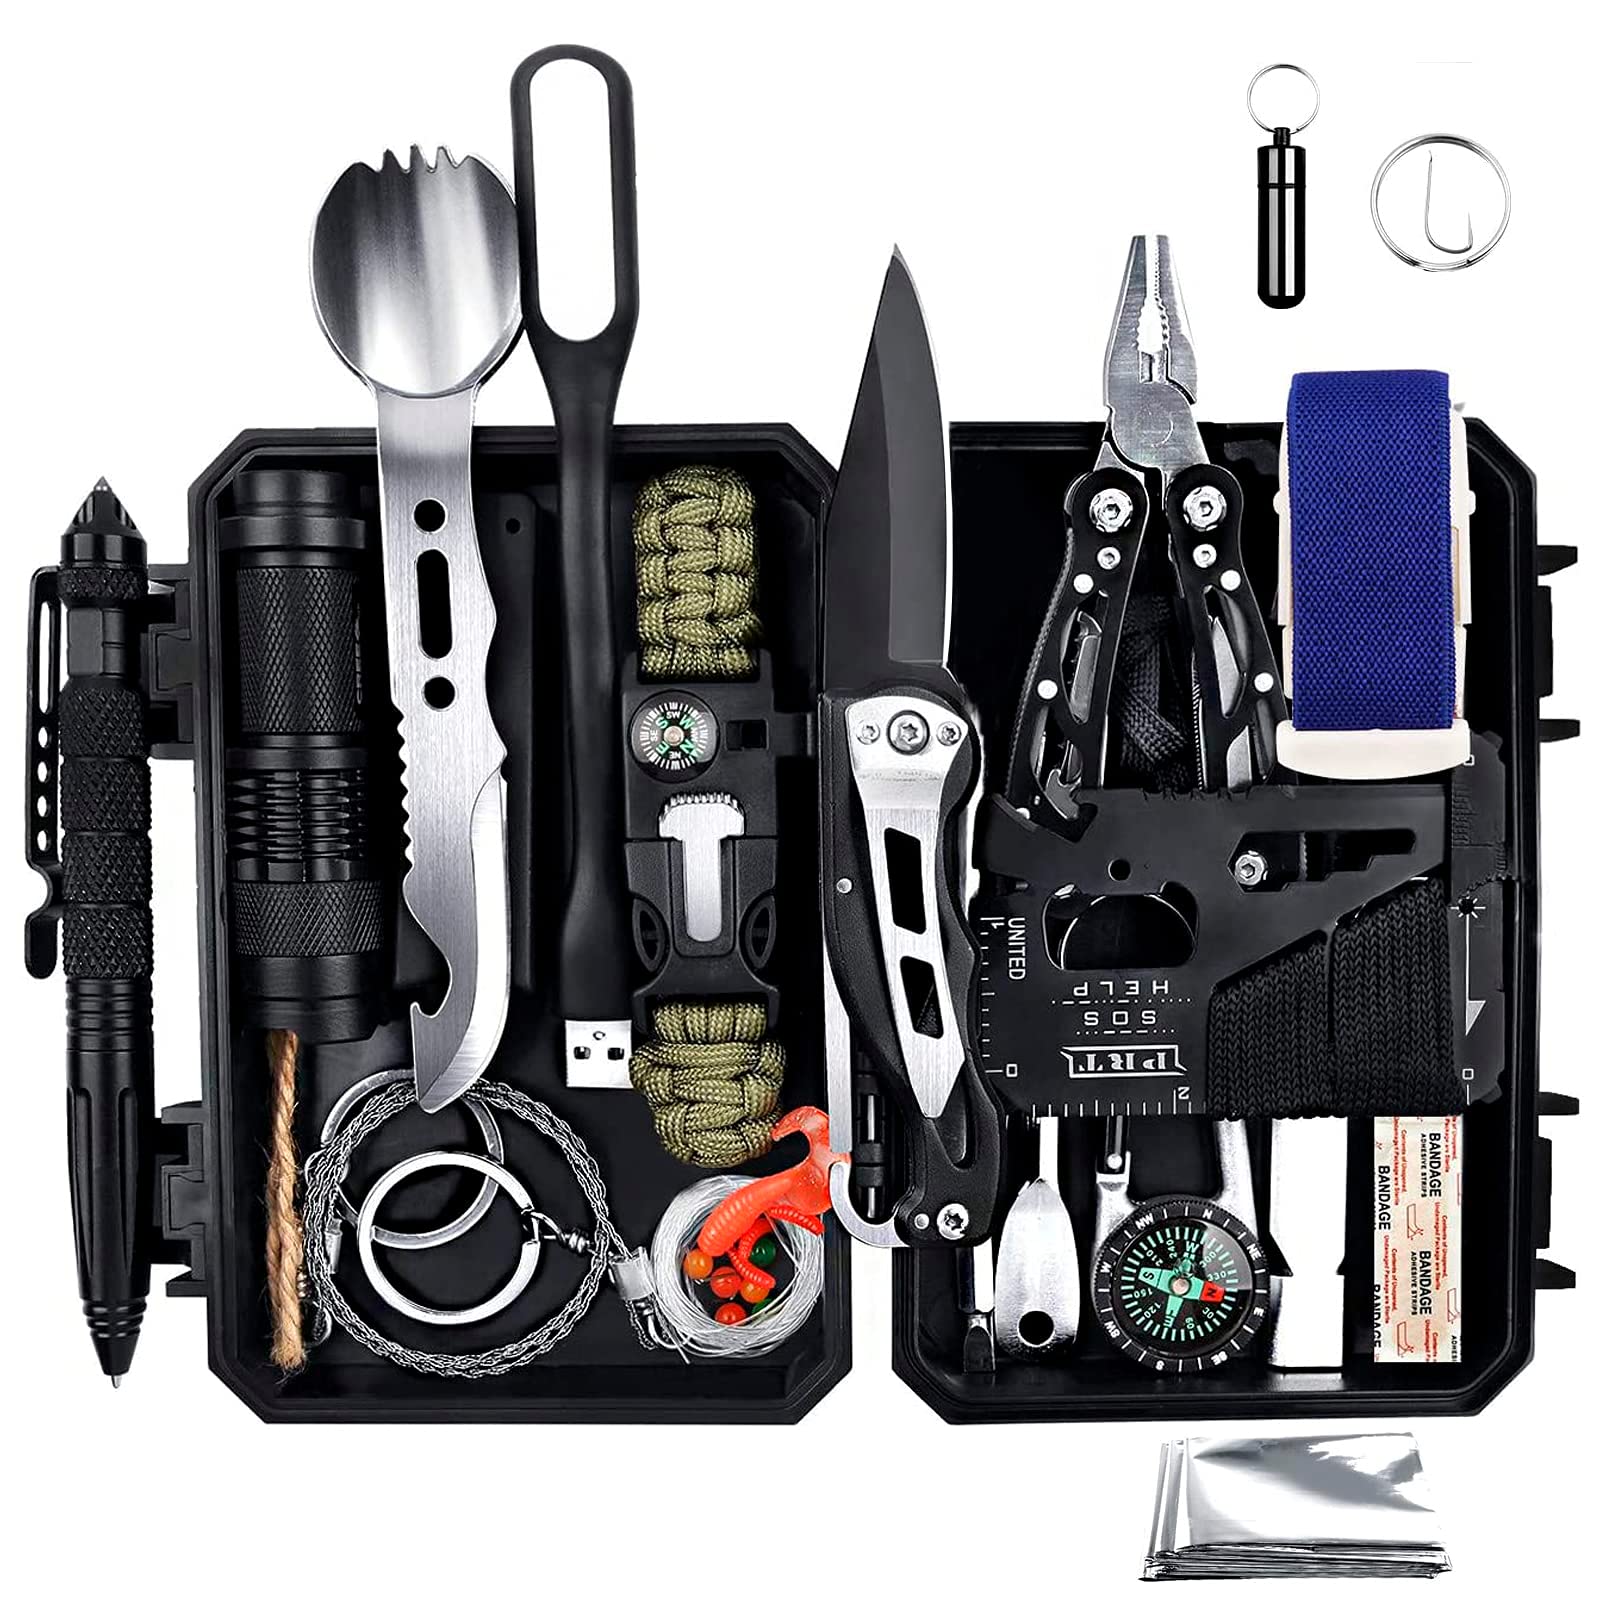 14in1 Outdoor Emergency Survival Gear Kit Camping Hiking Survival Gear  Tools Kit Survival Gear And Equipment, Outdoor Fishing Hunting Camping